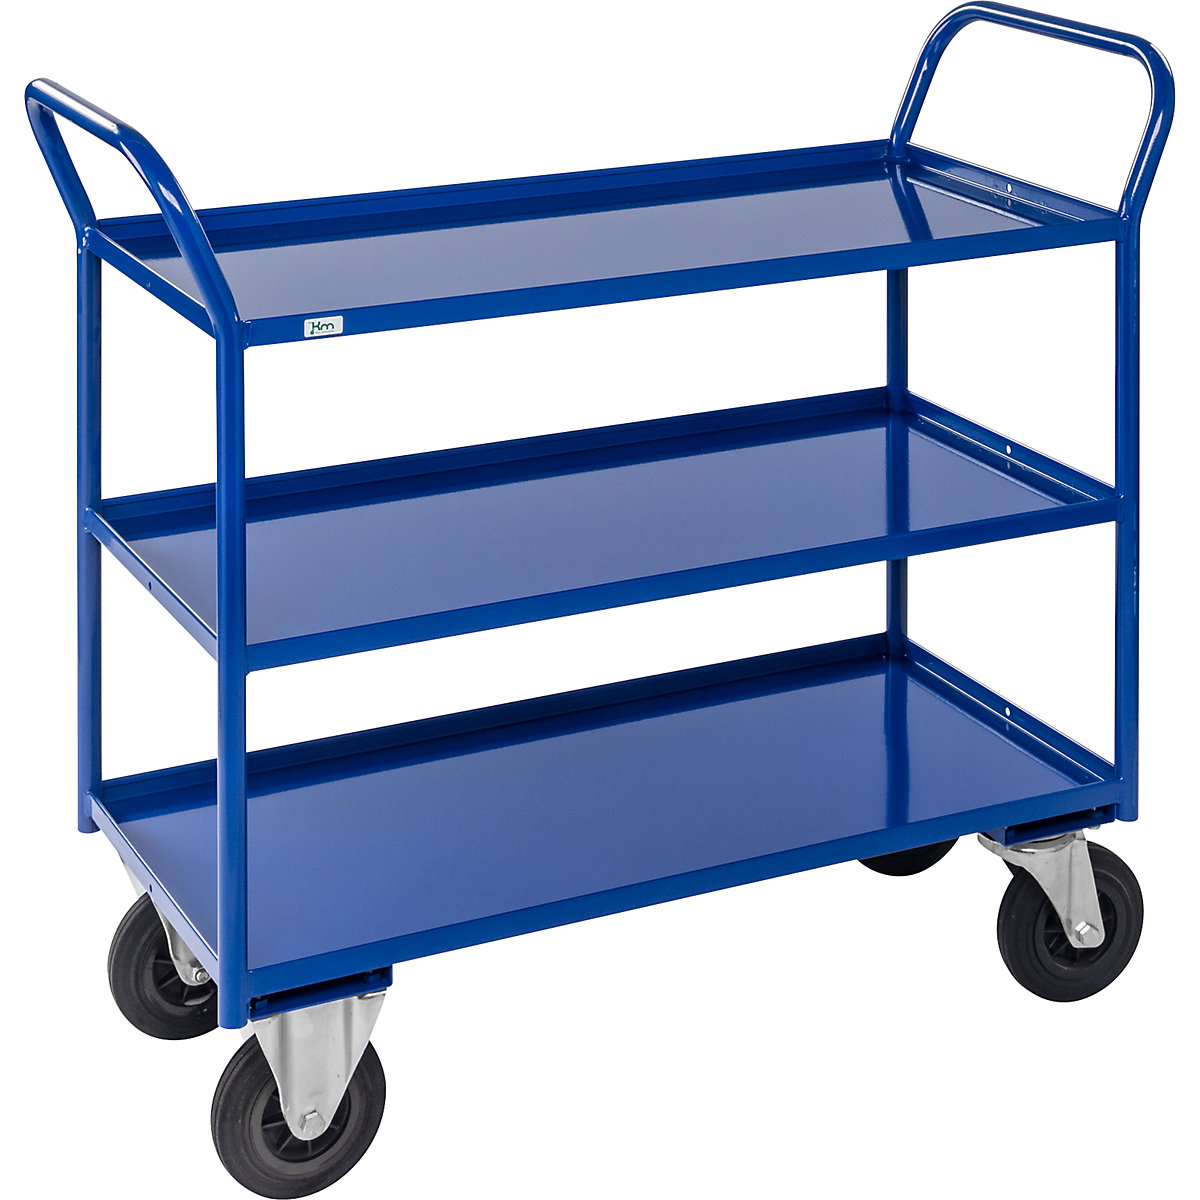 KM41 table trolley – Kongamek, 3 shelves with raised edges, LxWxH 1070 x 550 x 1000 mm, blue, 2 swivel castors with stops, 2 fixed castors, 5+ items-6